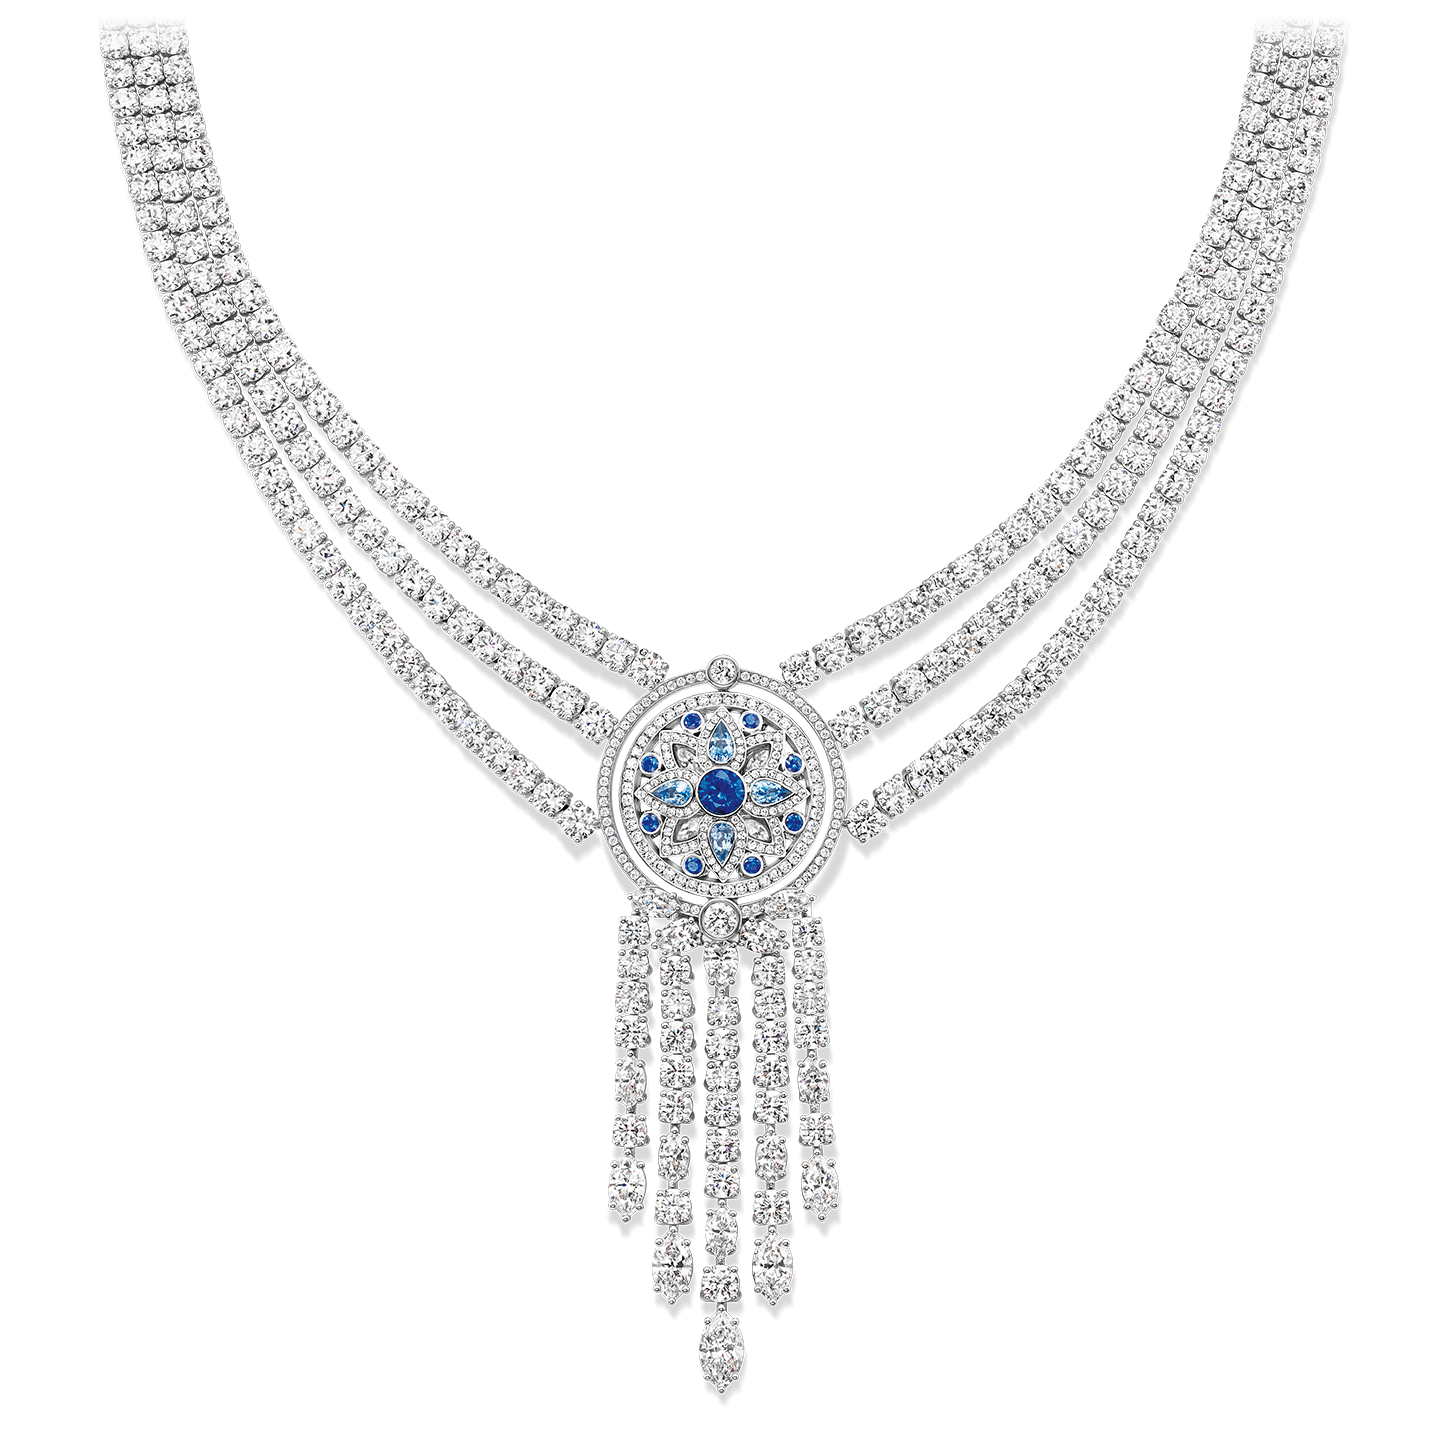 A three-row necklace with 4 pear-shaped aquamarines, 9 round sapphires, 686 marquise, pear-shaped, and round brilliant diamonds, set in platinum. The center motif is reversible.